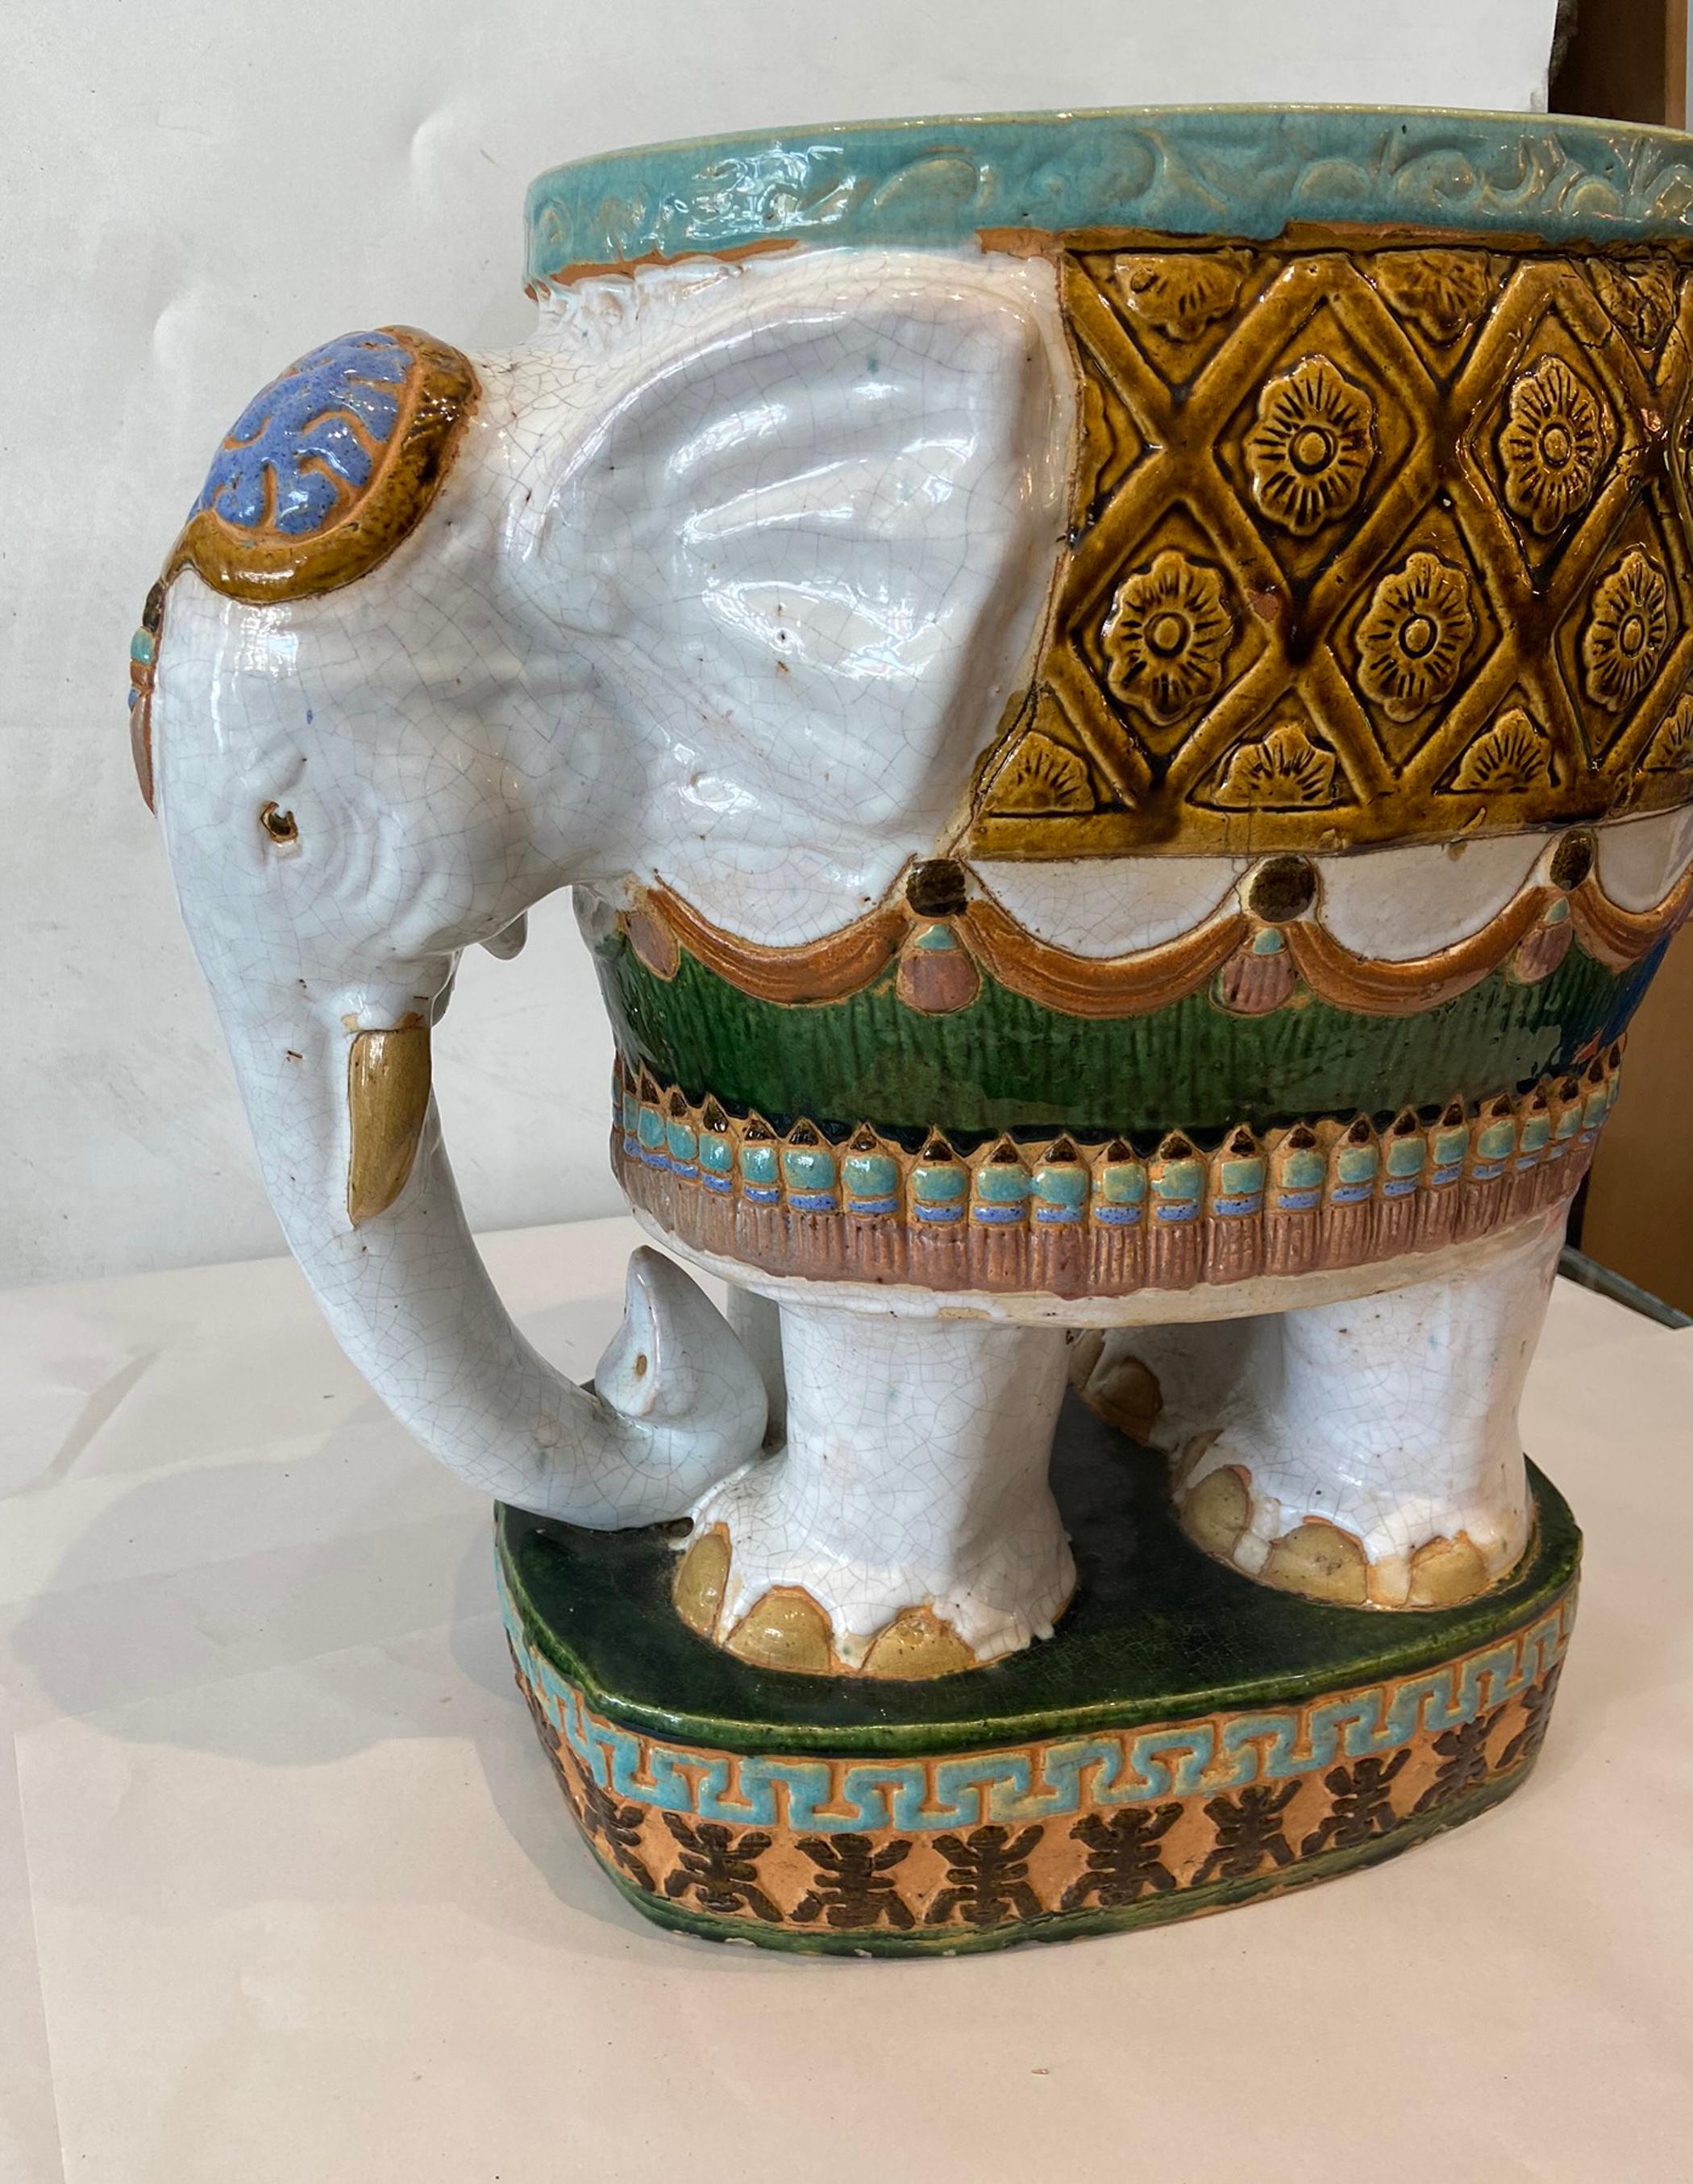 Vintage terracotta elephant planter. Poly-chromed ceramic glazed terracotta planter could be used both indoors or outdoors In very good condition.